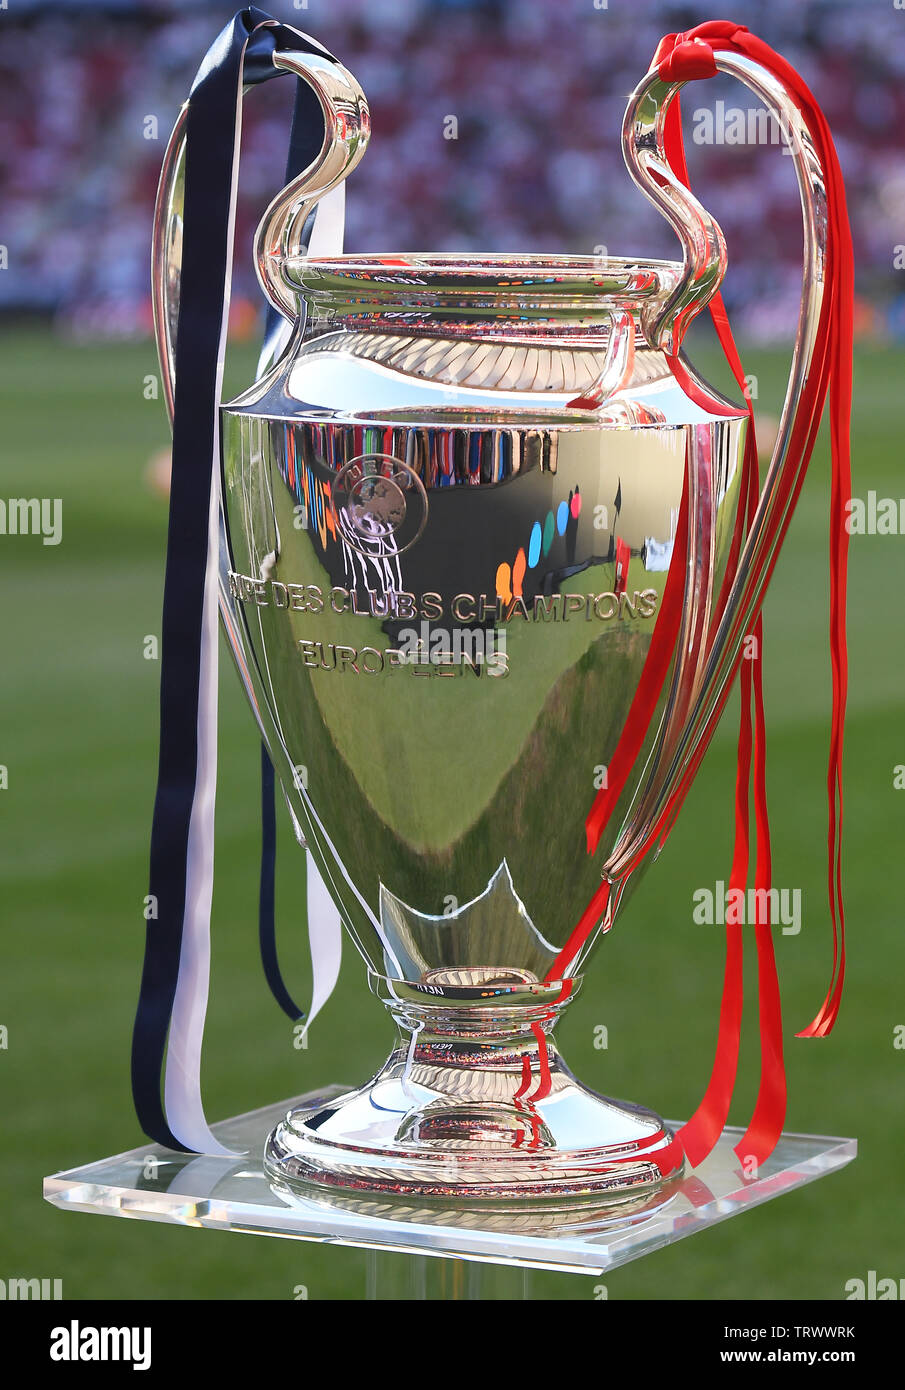 MADRID, SPAIN - JUNE 1, 2019: The UCL trophy pictured prior to the 2018/19 UEFA Champions League Final between Tottenham Hotspur (England) and Liverpool FC (England) at Wanda Metropolitano. Stock Photo